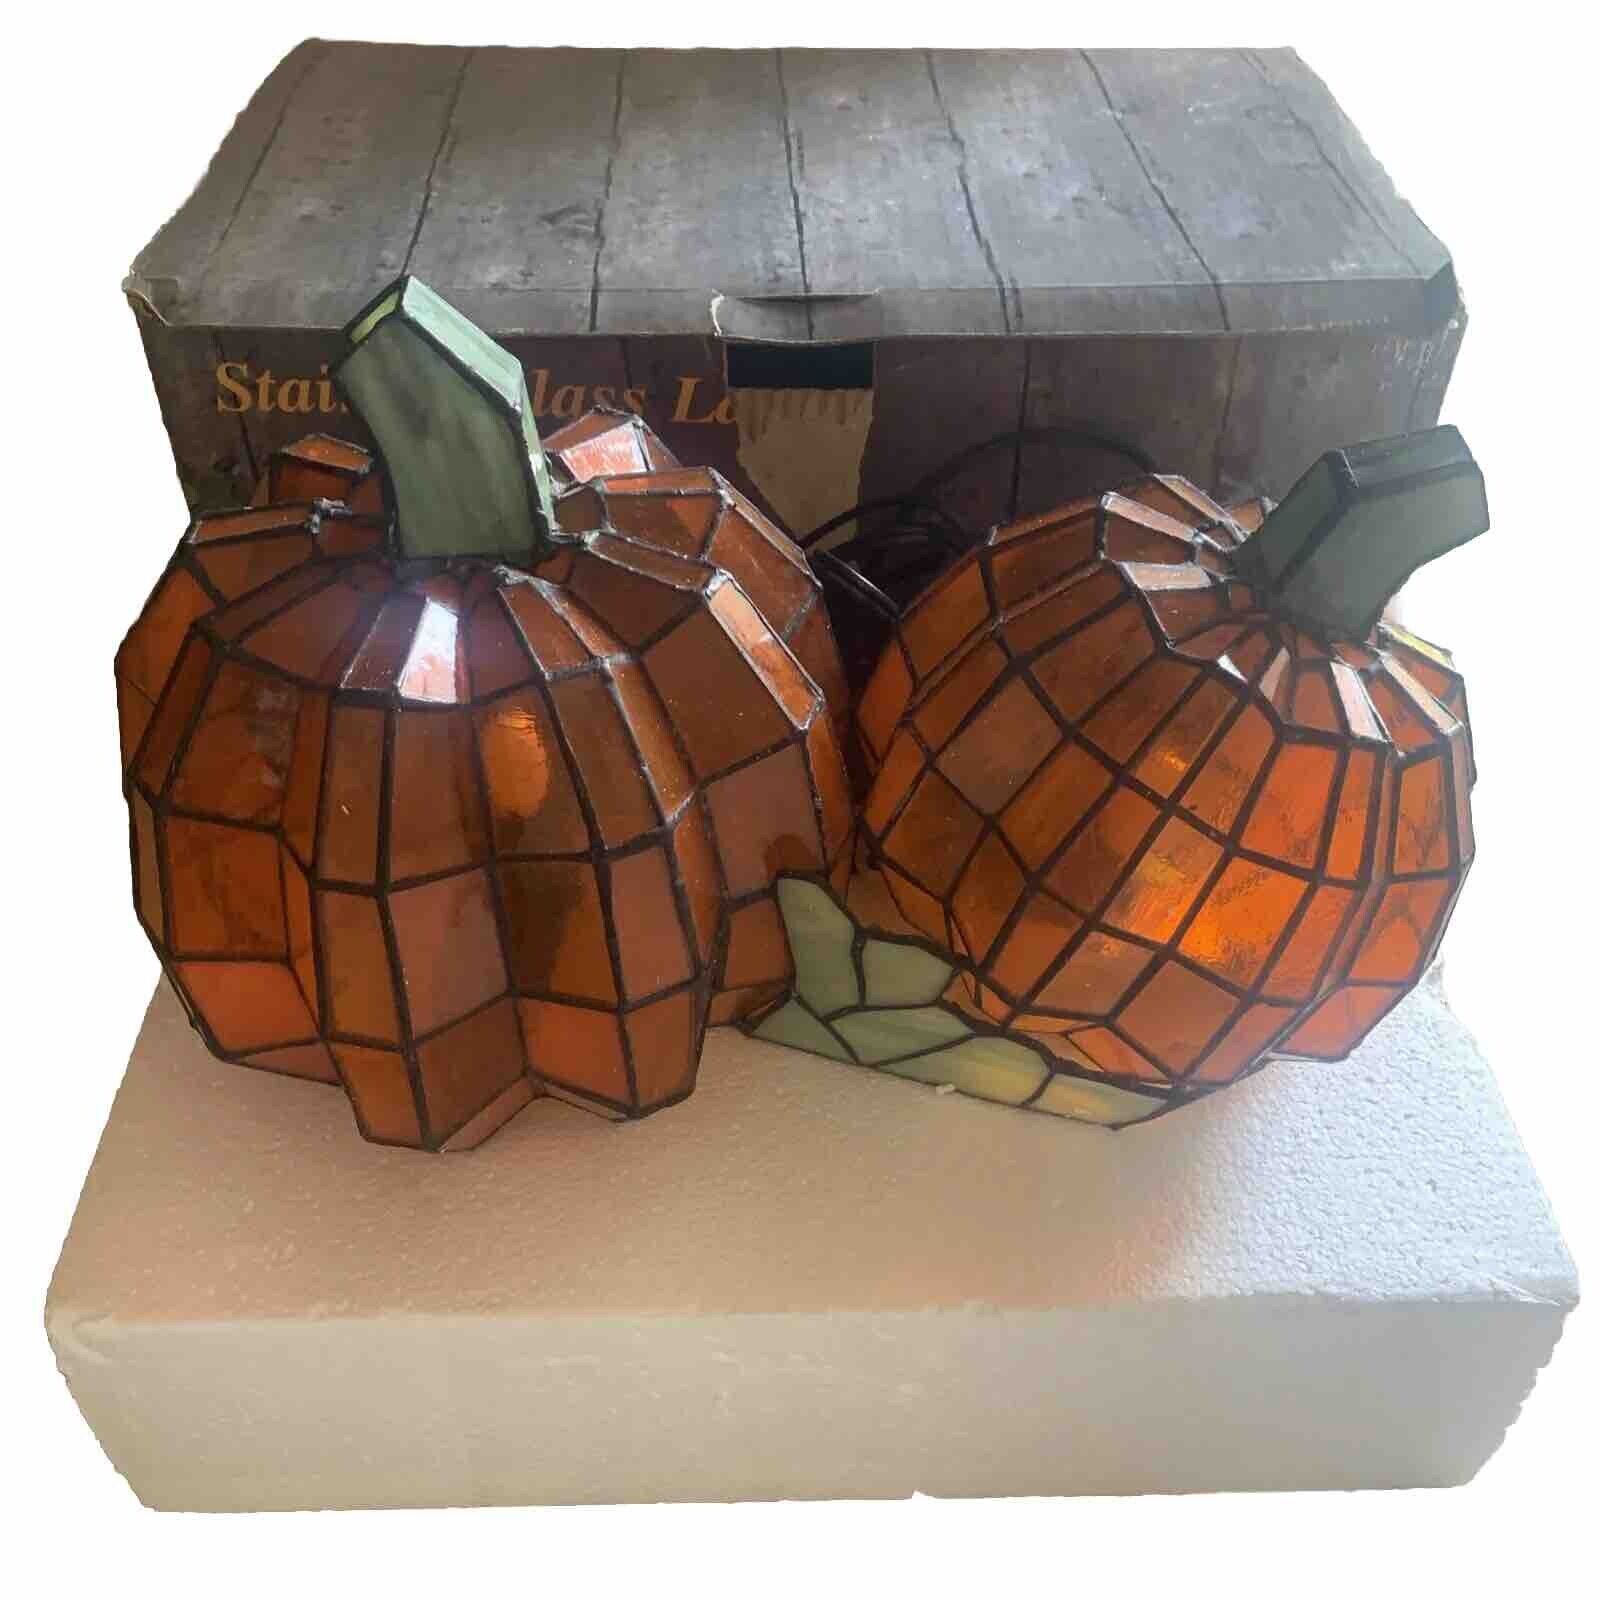 RARE Cracker Barrel Dbl PUMPKIN STAINED GLASS TIFFANY STYLE ACCENT LAMP With Box